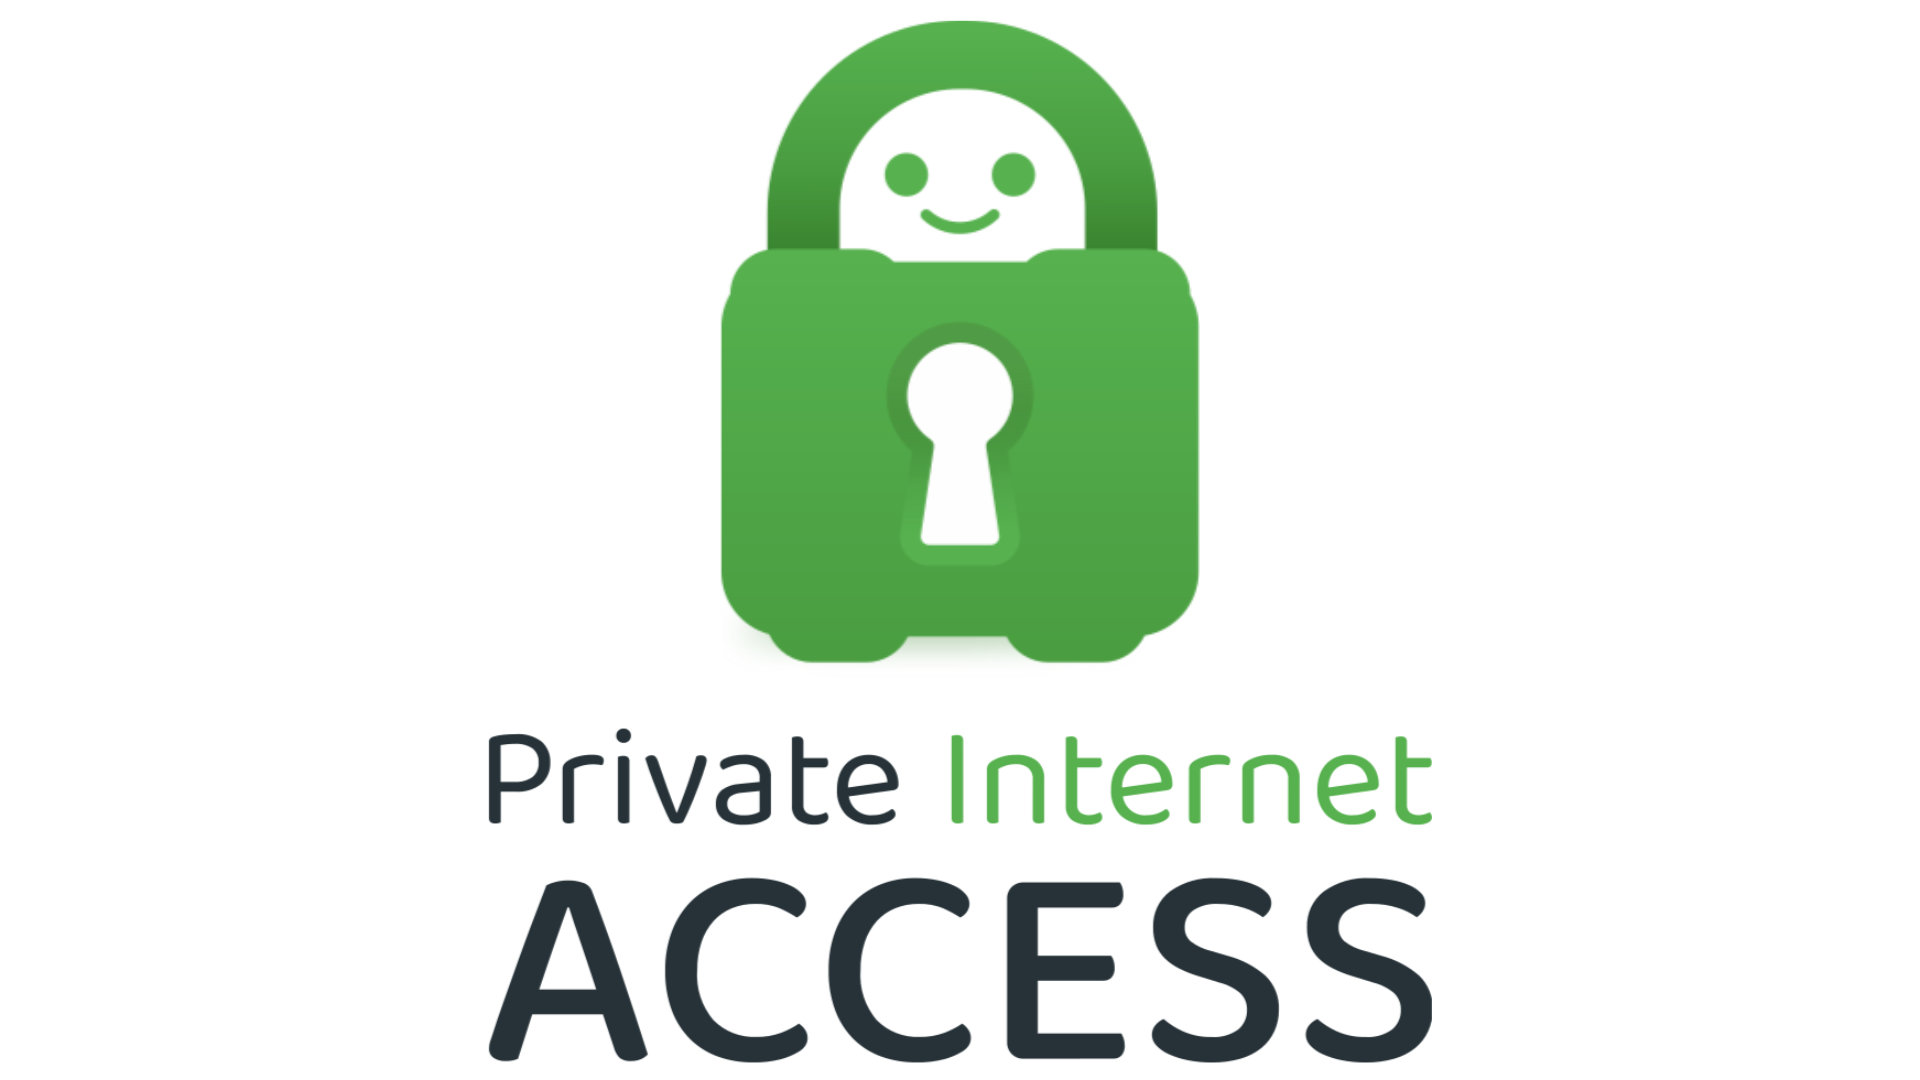 The best VPN for gaming: Private Internet Access has a smiling padlock for a logo